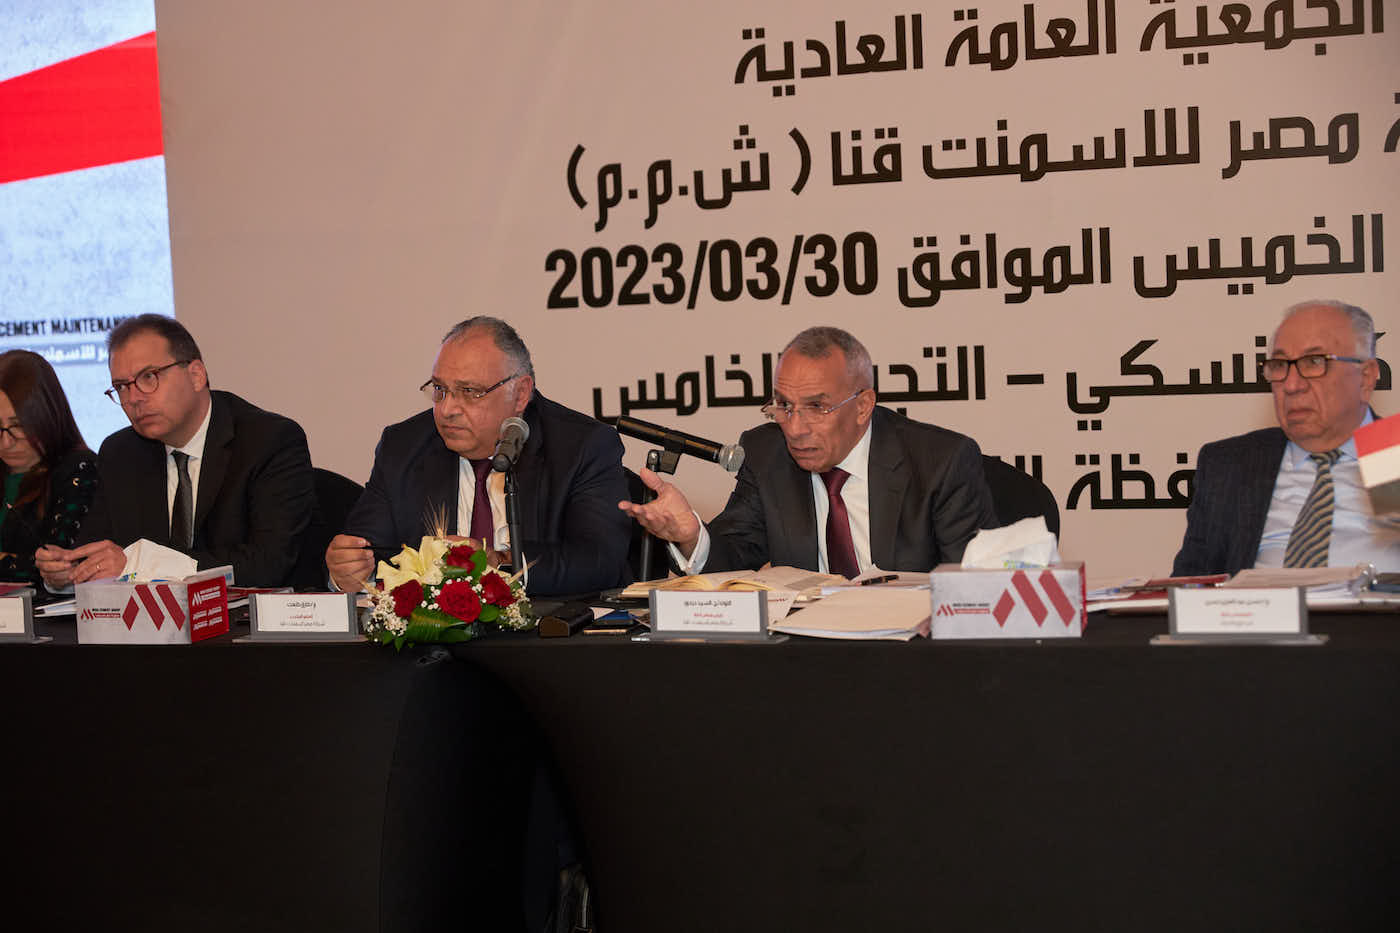 Misr Cement Group - Gallery - Misr Cement Qena Annual General Assembly 2023 - 33